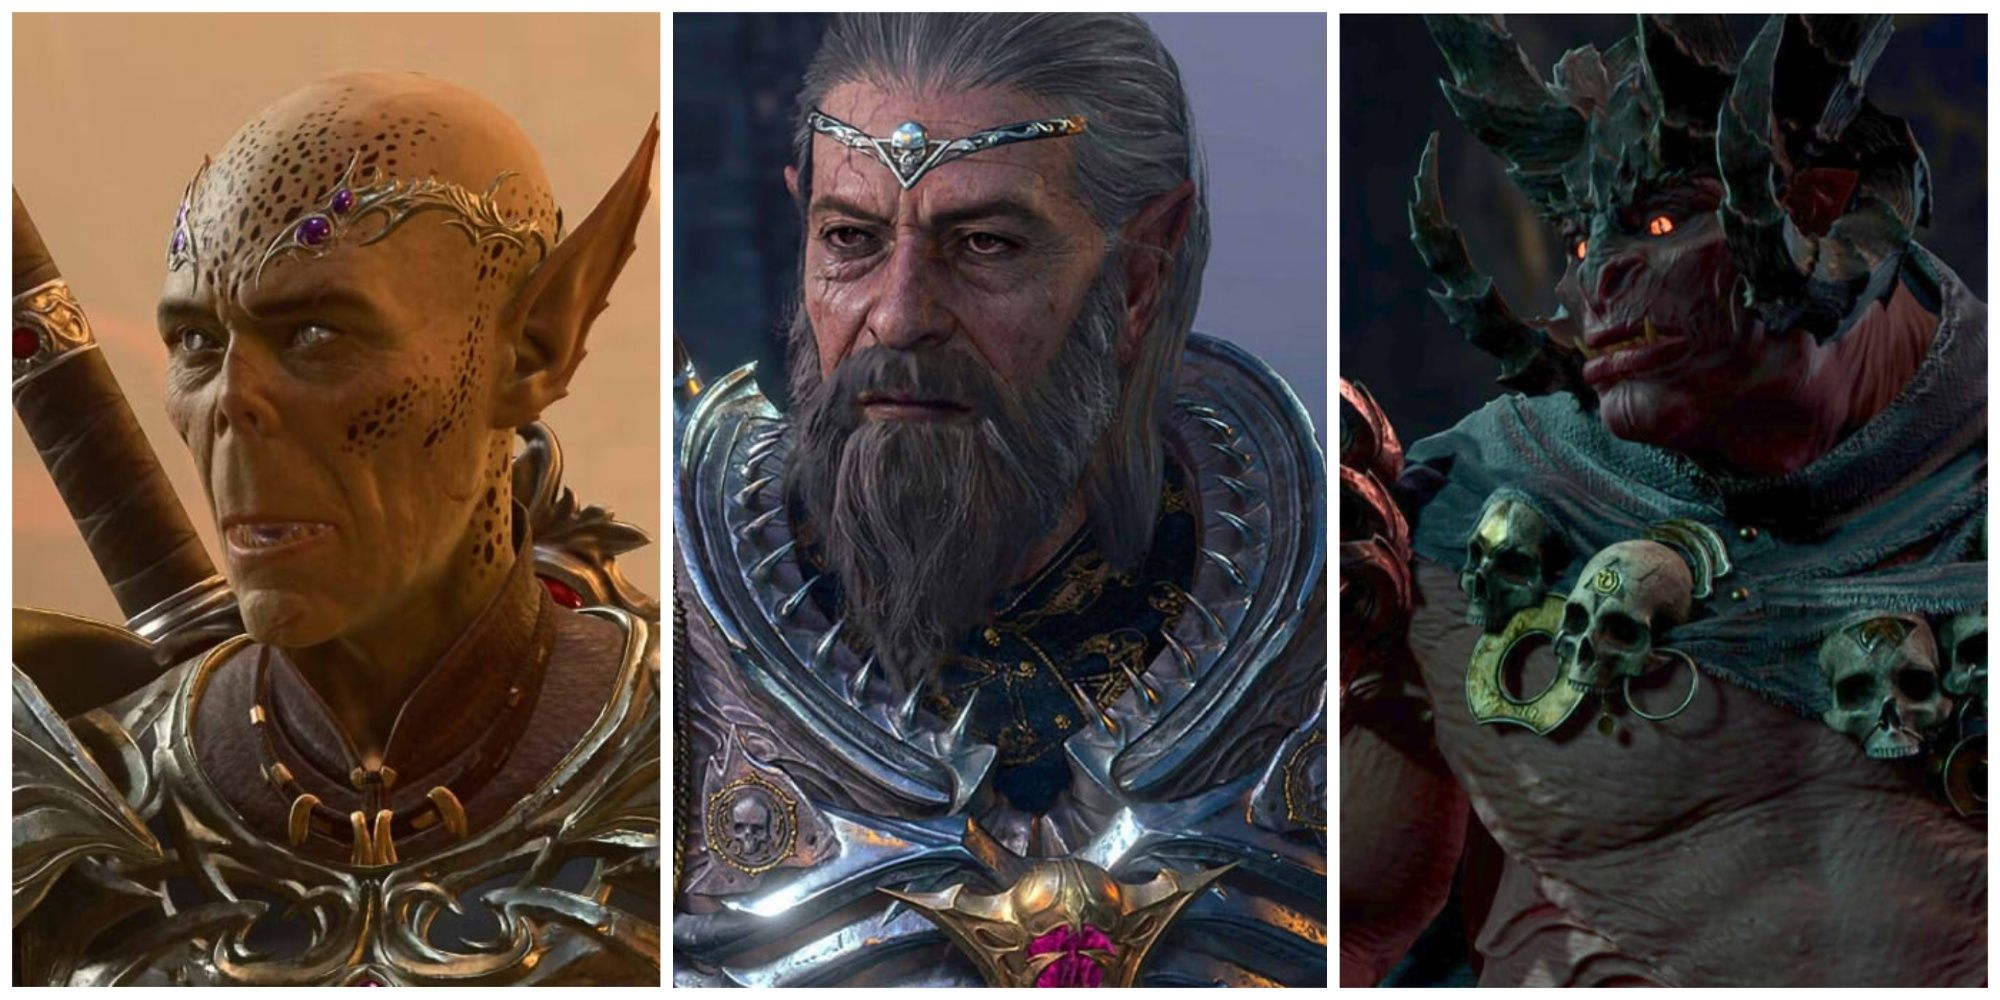 Collage of Baldur's Gate 3: Inquisitor (left), Ketheric Thorm (middle), and Yurgir (right)